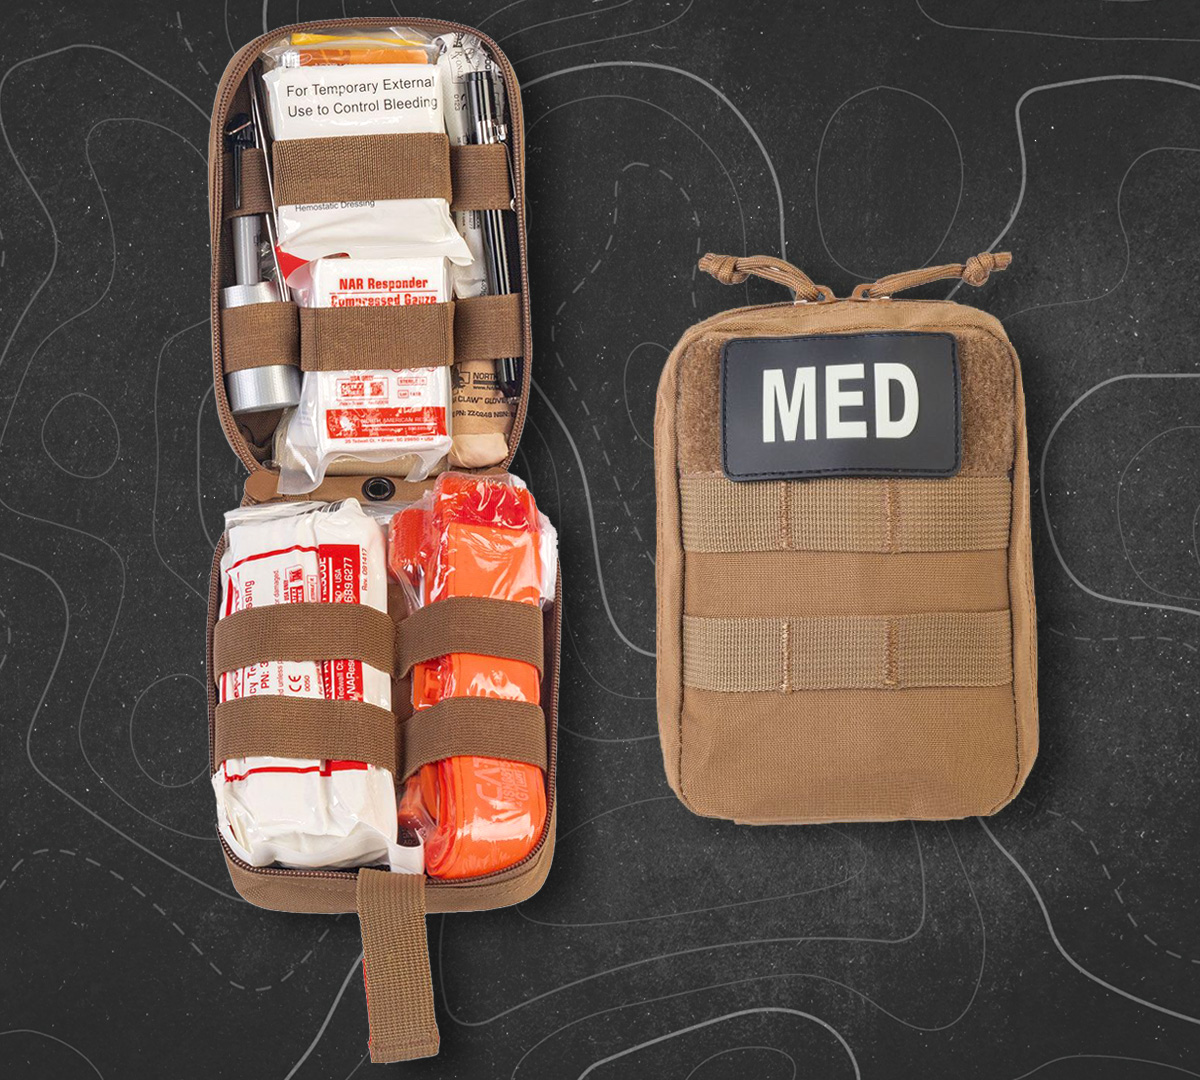 A well-stocked medical kit is critical in any survival situation.